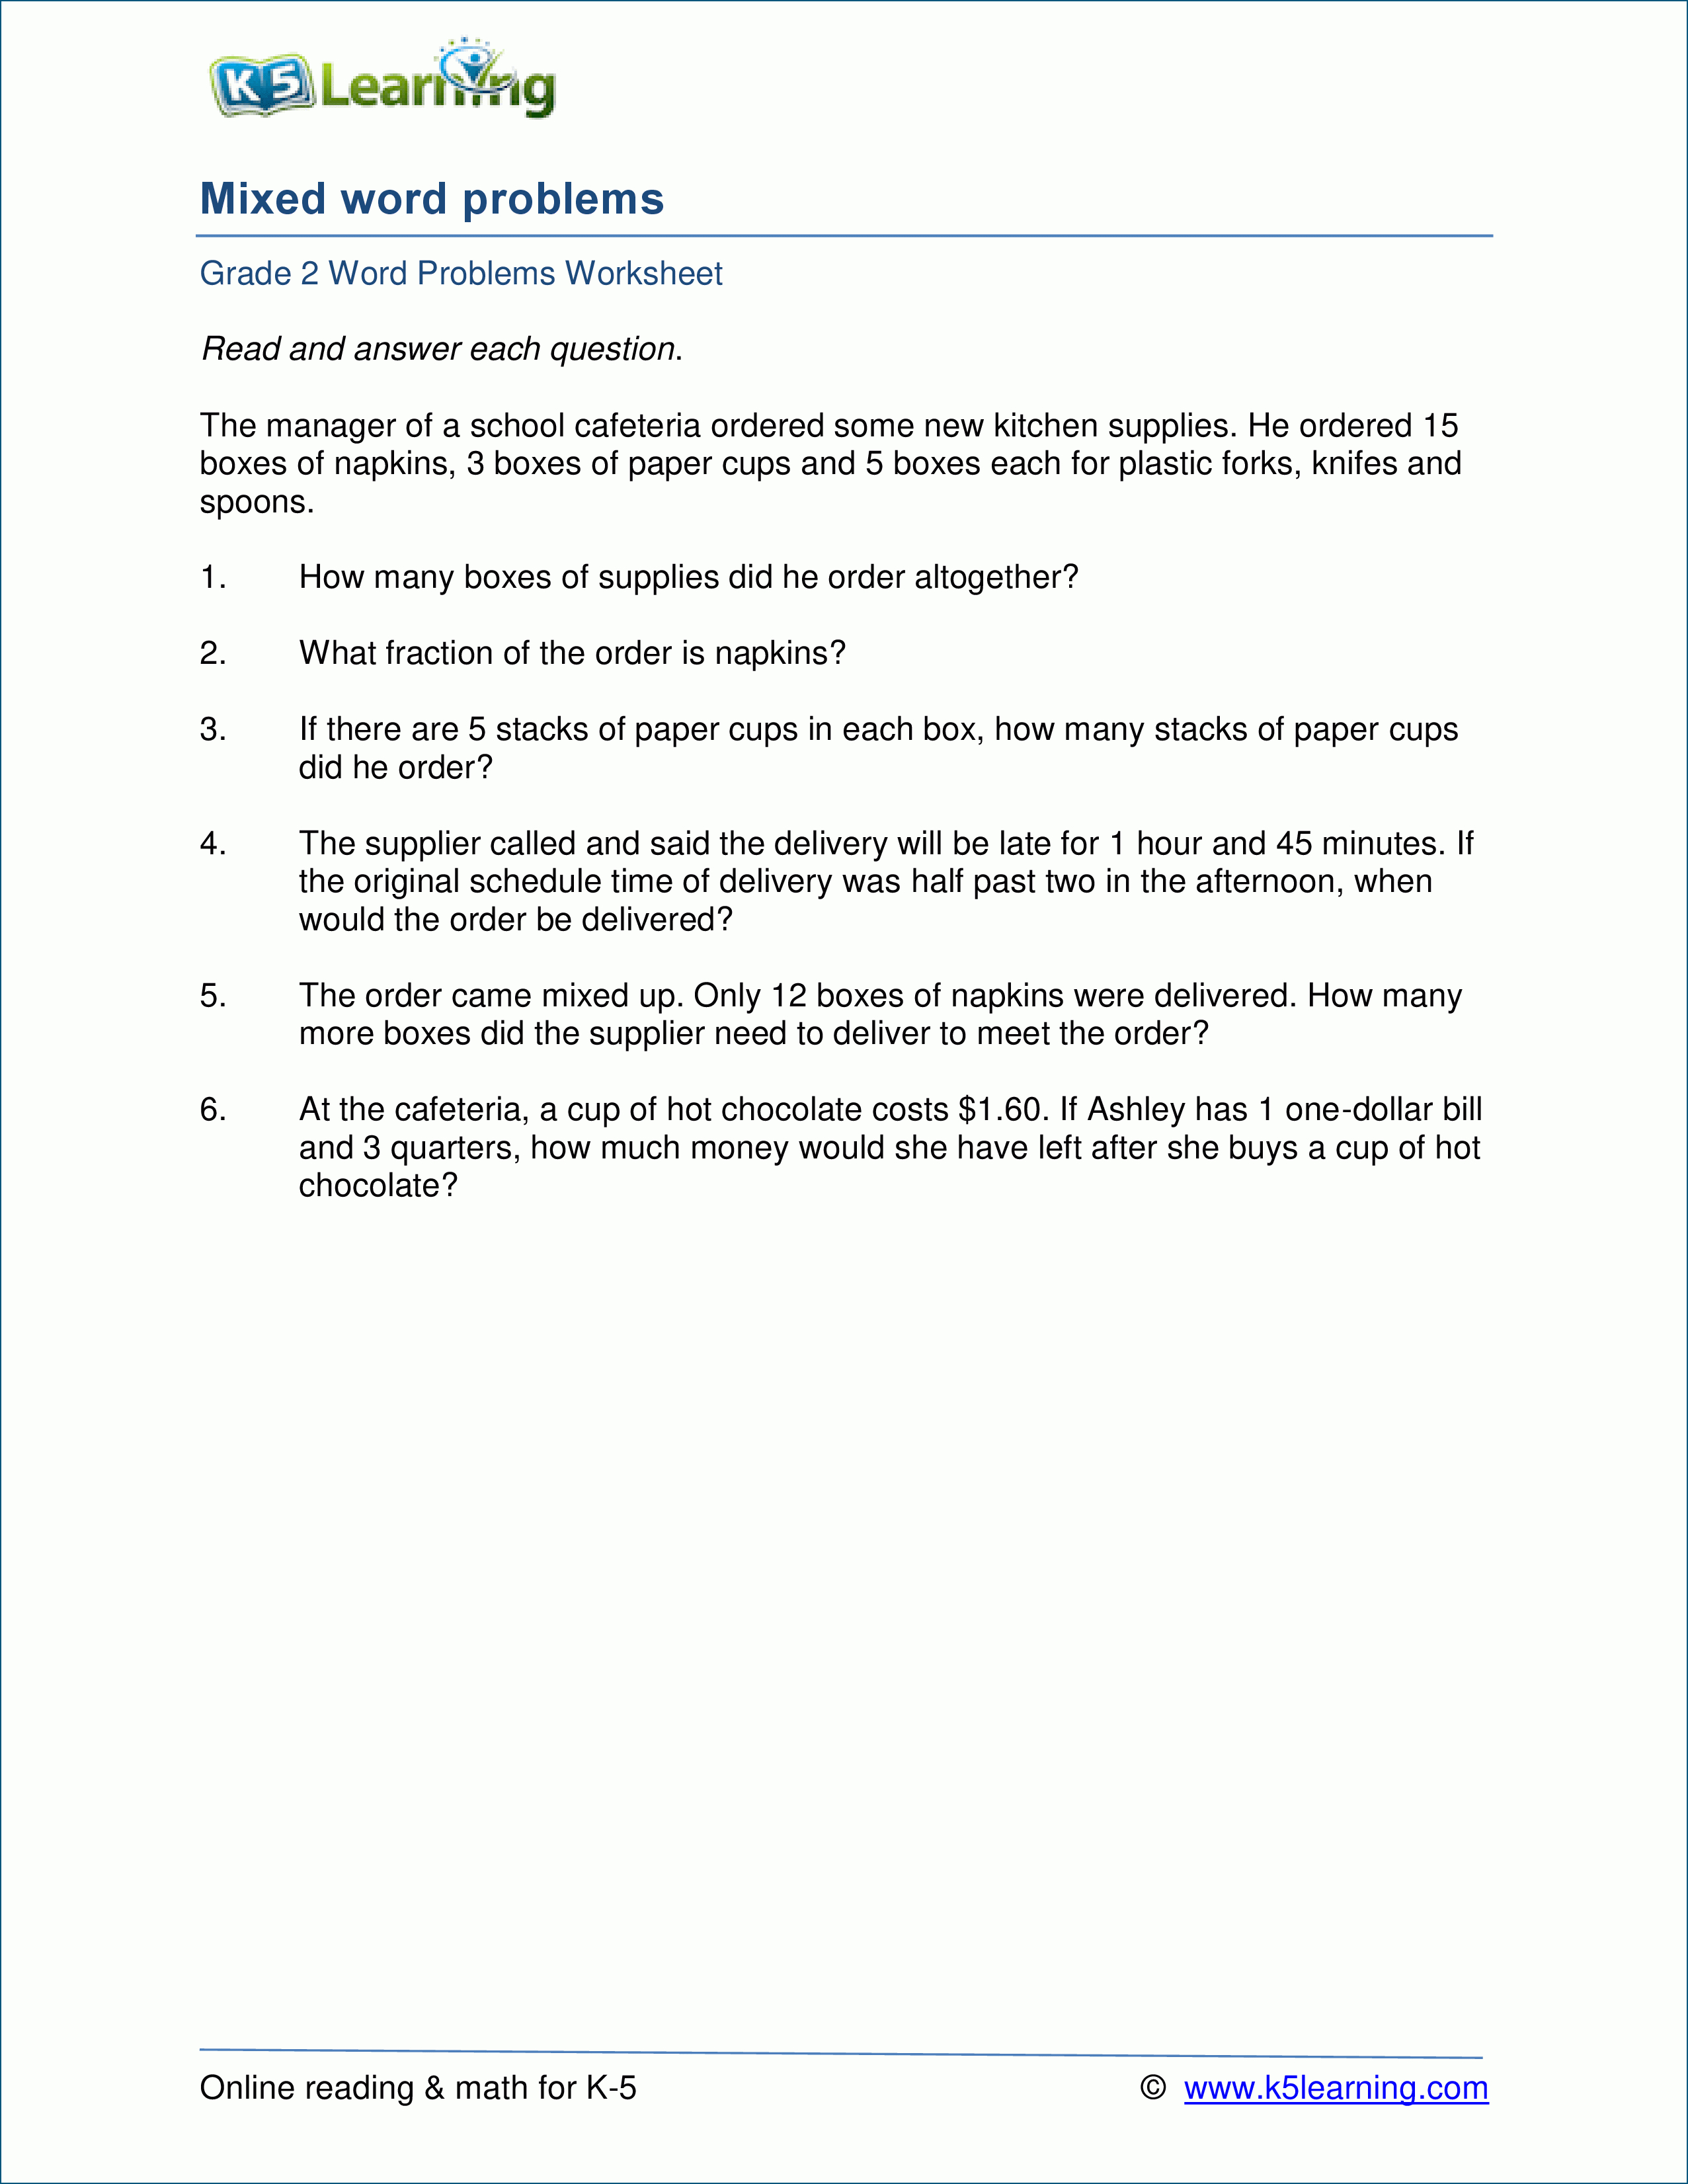 Grade 2 Mixed Word Problem Worksheets  K5 Learning Together With Money Word Problems Worksheets